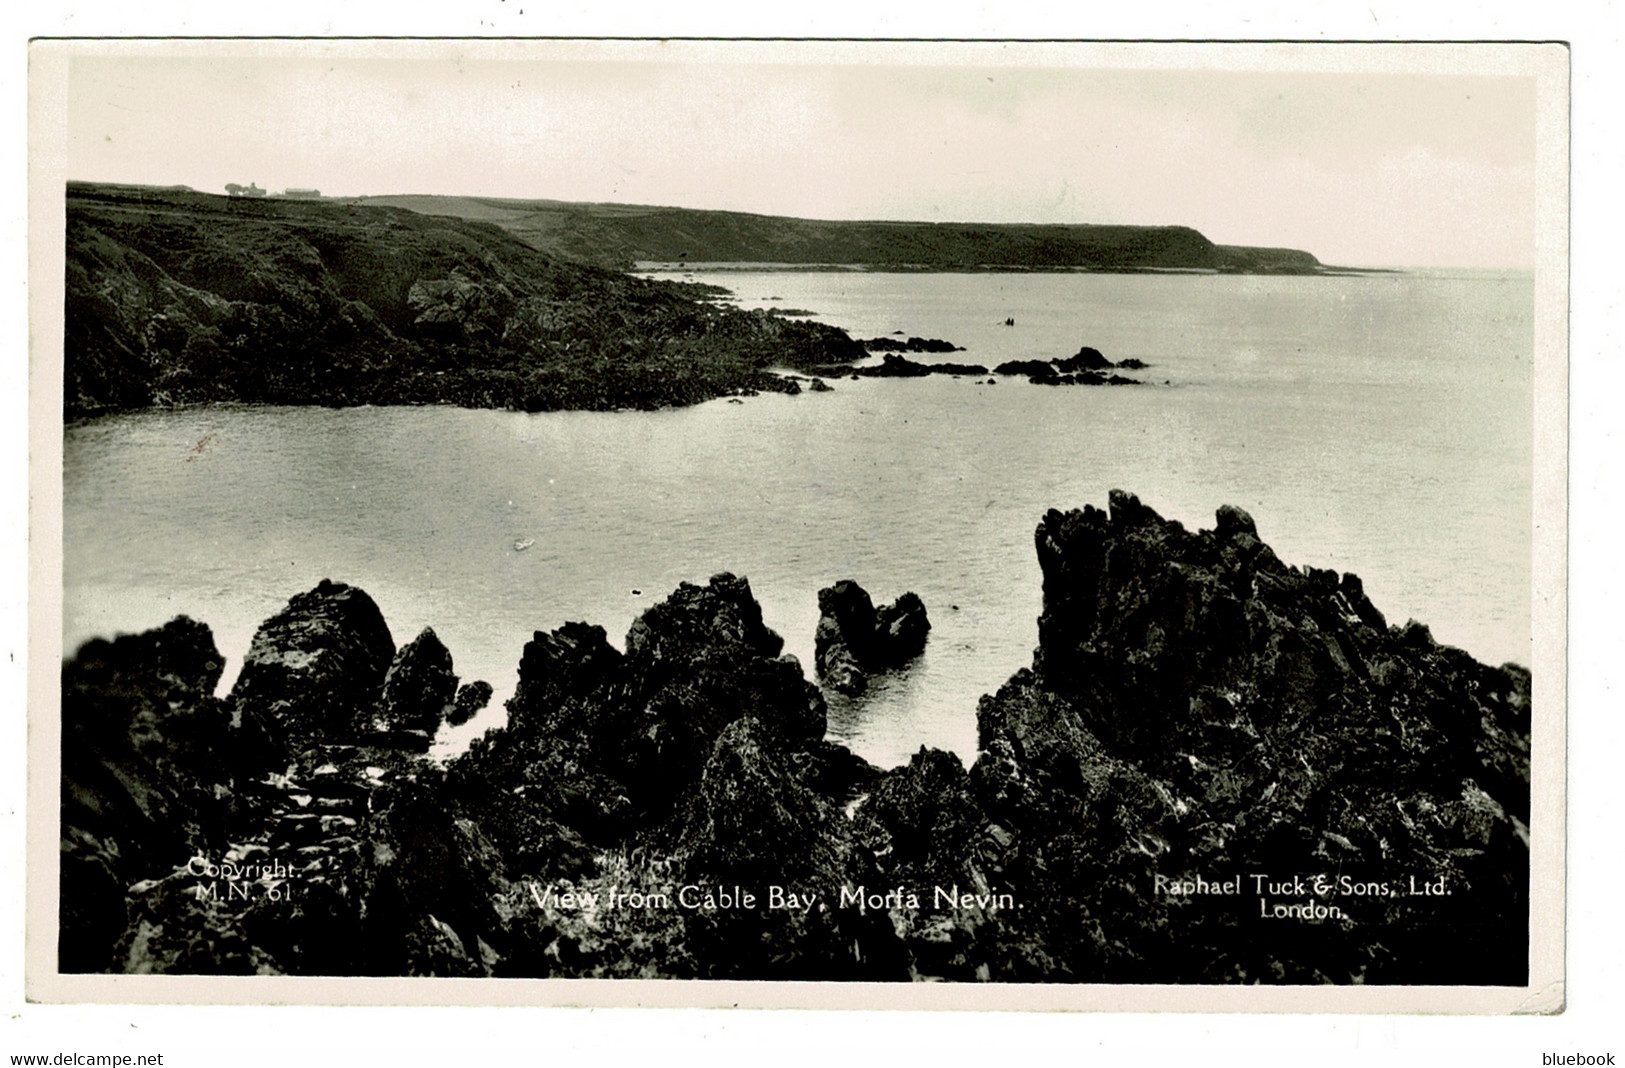 Ref 1529 -  Raphael Tuck Real Photo Postcard - View From Cable Bay Morfa Nevin Wales - Caernarvonshire